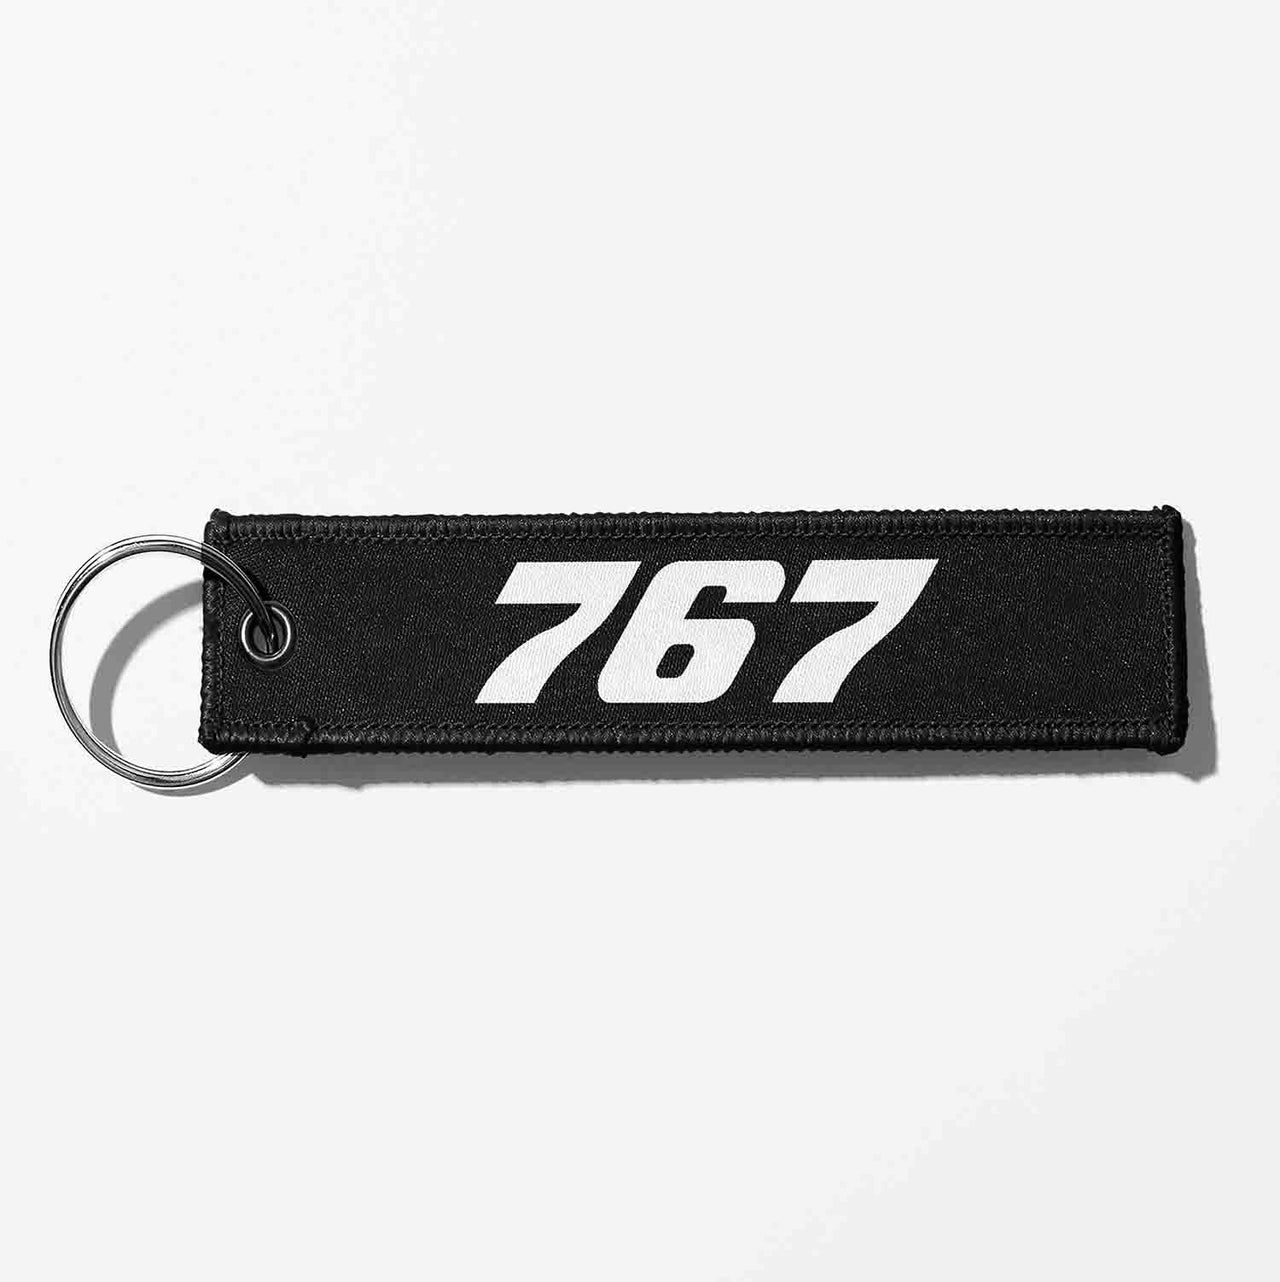 Boeing 767 Flat Text Designed Key Chains